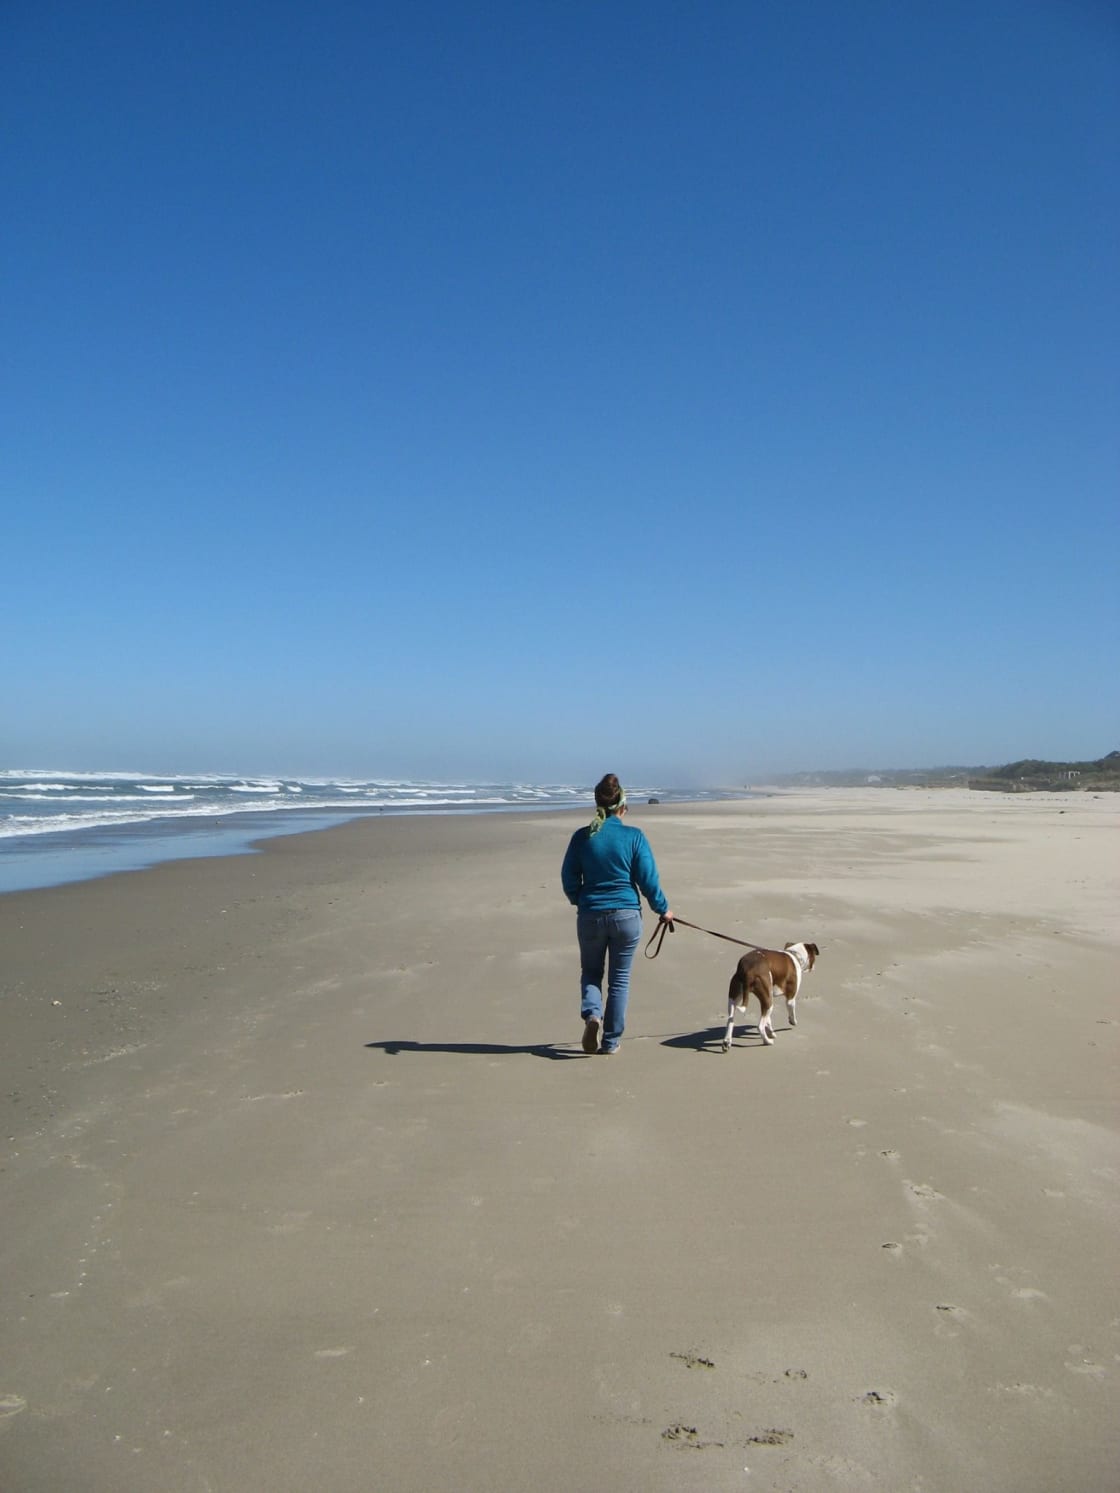 This stretch of beach is a 15 minute walk from home.  You can walk all the way to Yachats on the beach